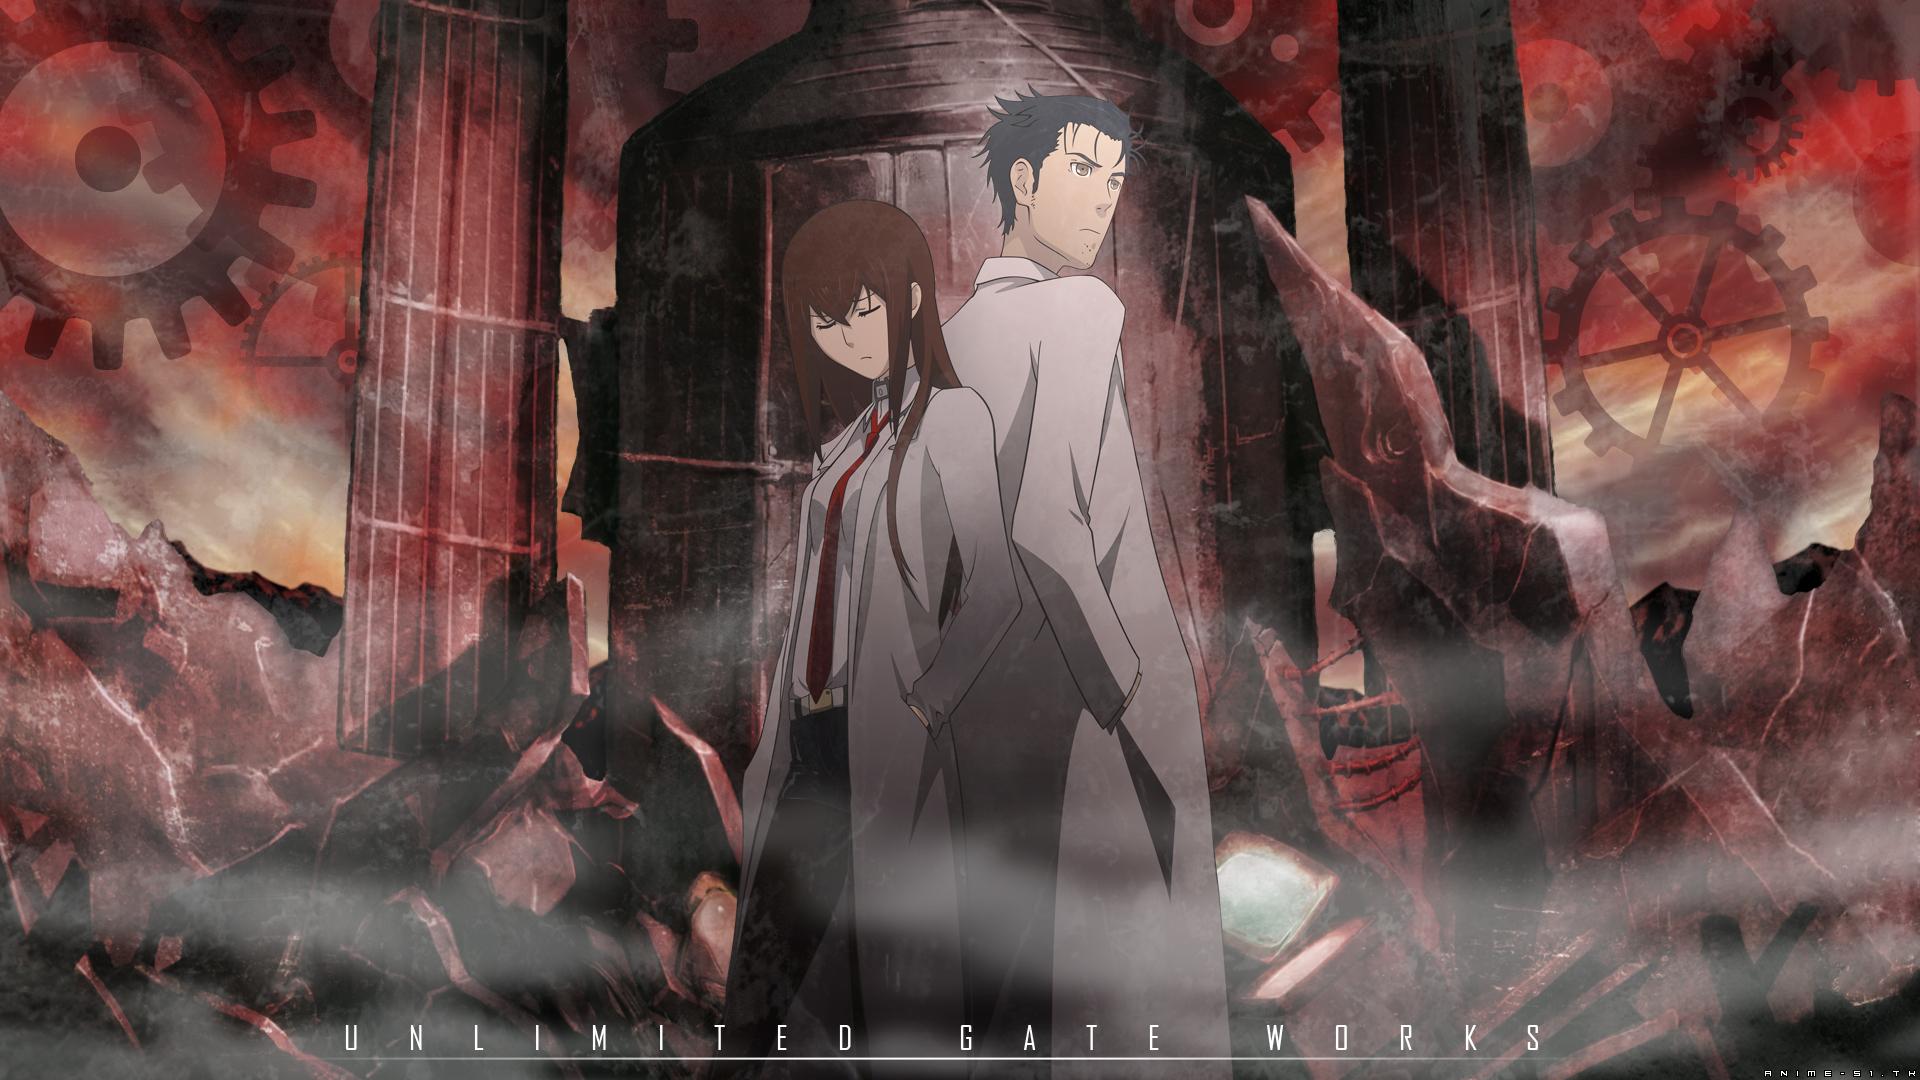 Download Steins Gate Anime Characters on City Street Background